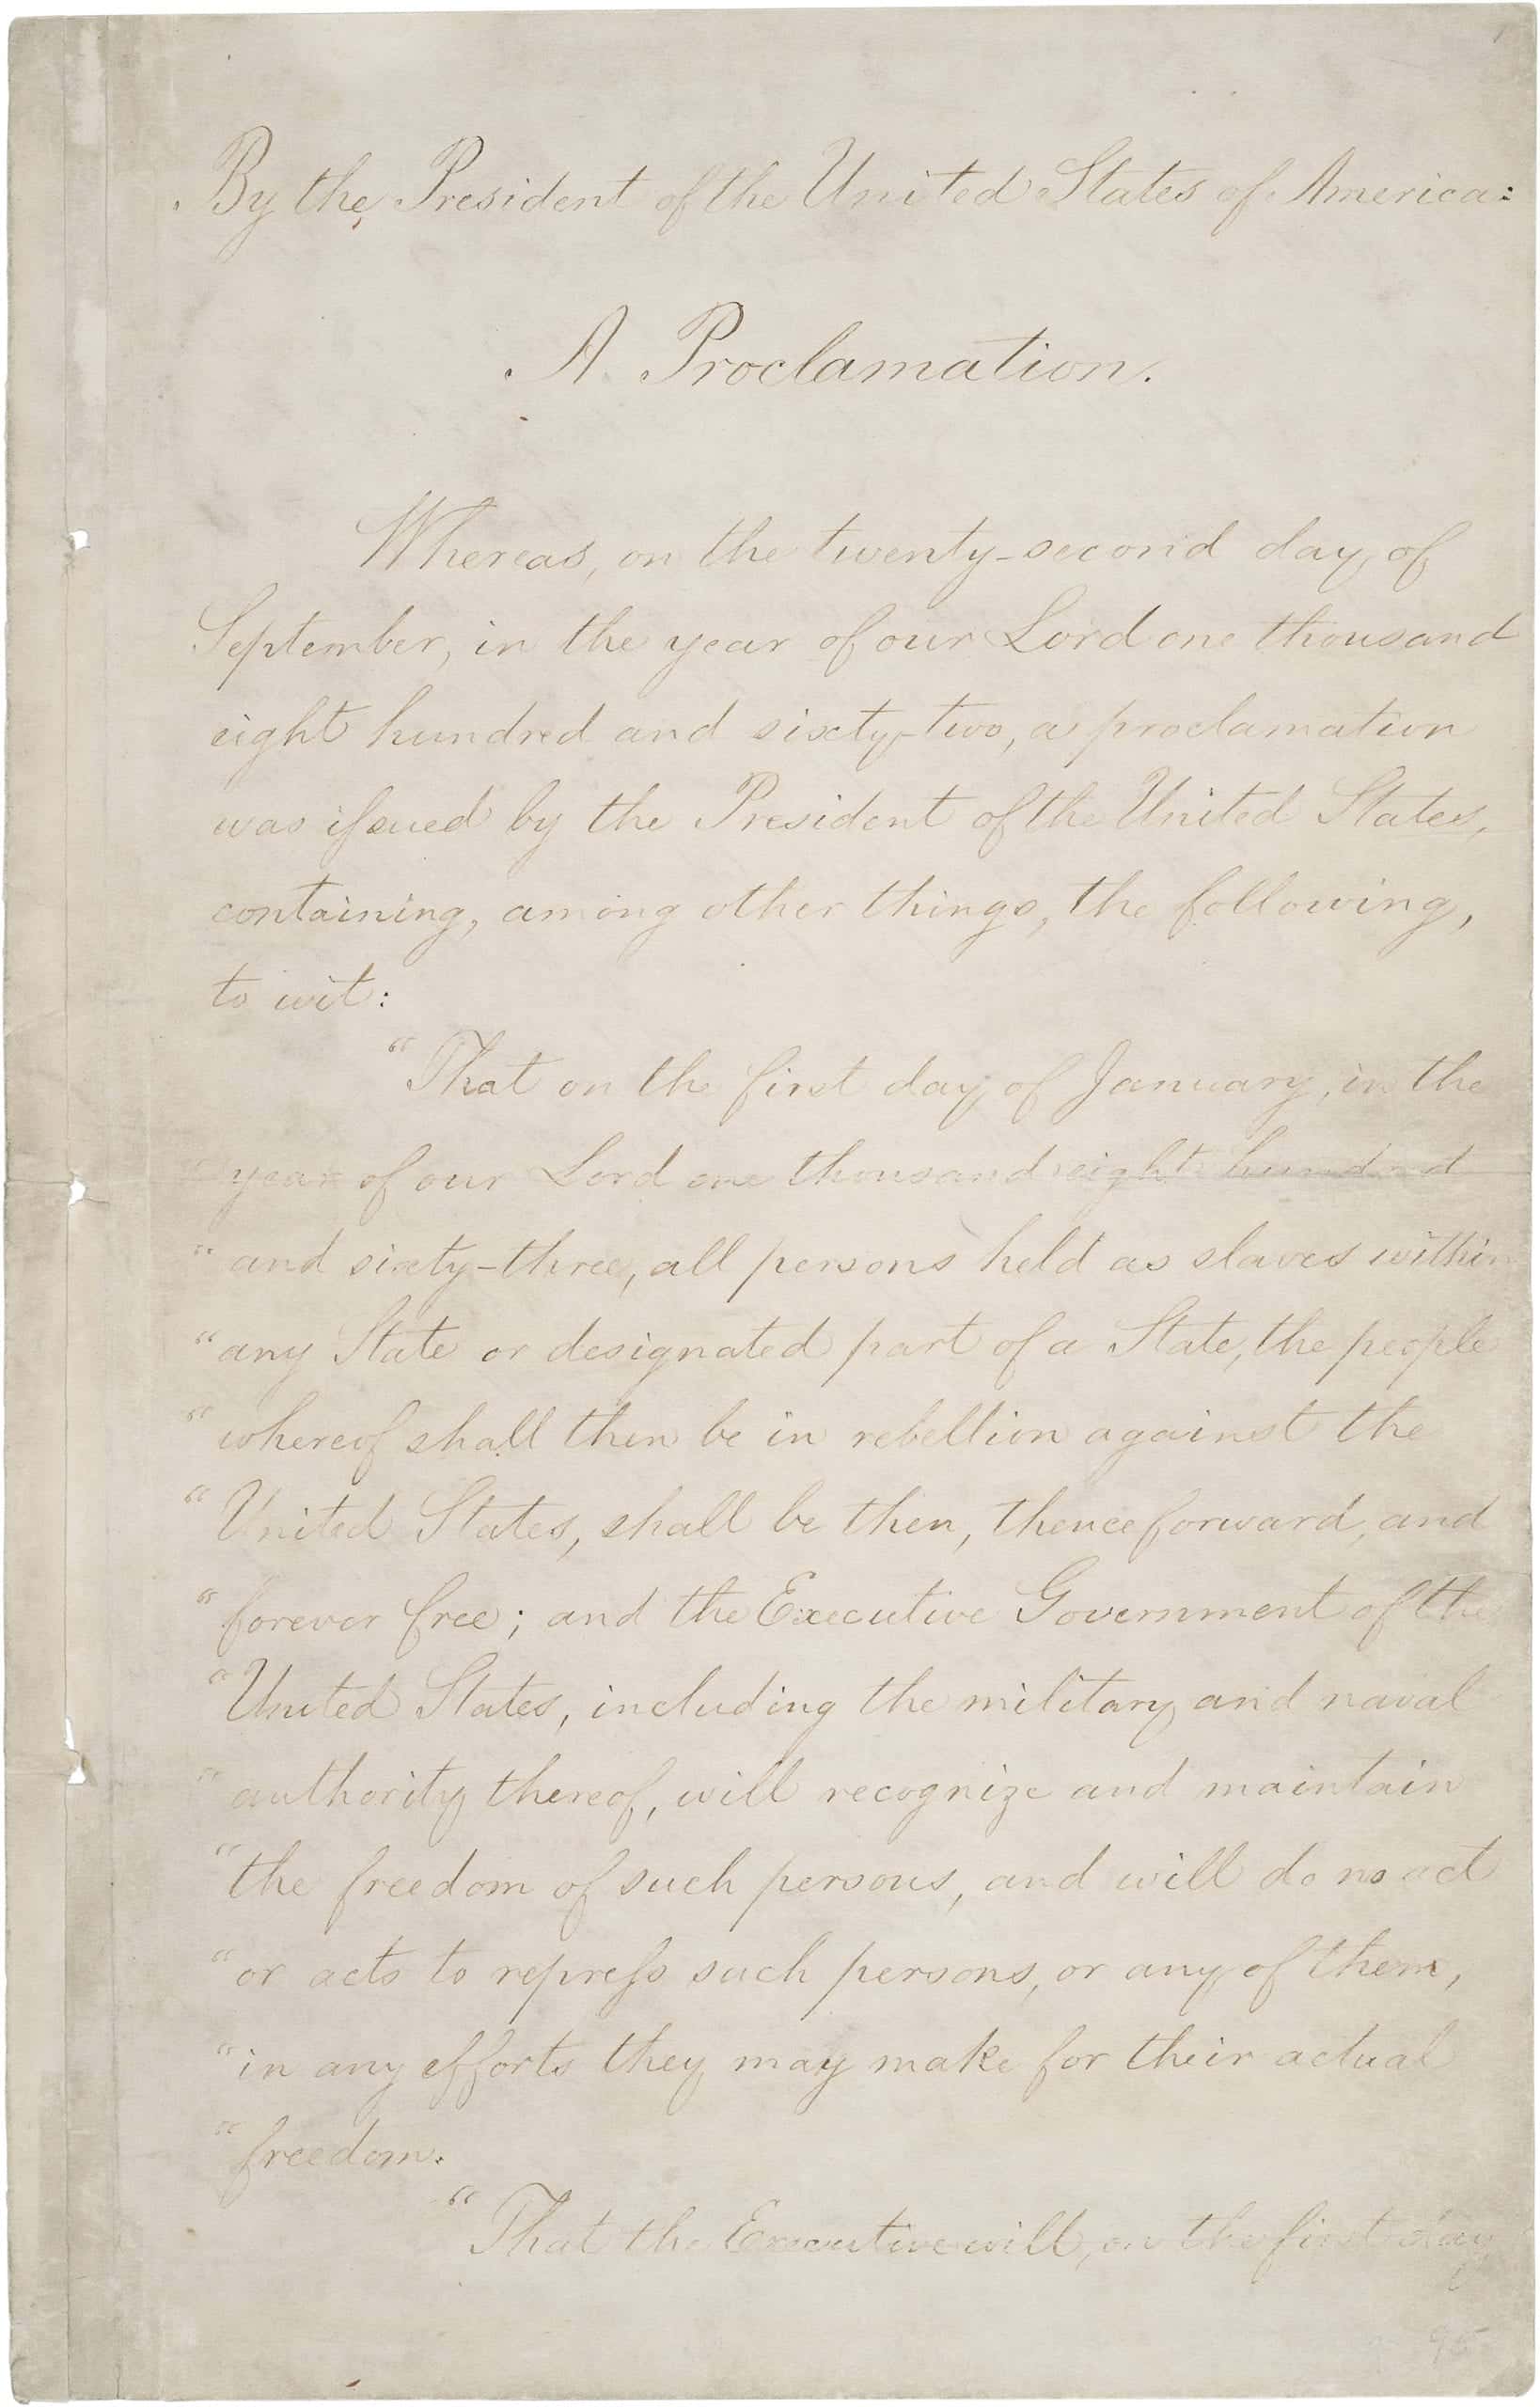 Lincoln, Abraham. “Emancipation Proclamation.” National Archives and Records Administration, 299998, January 1, 1863, https://catalog.archives.gov/id/299998